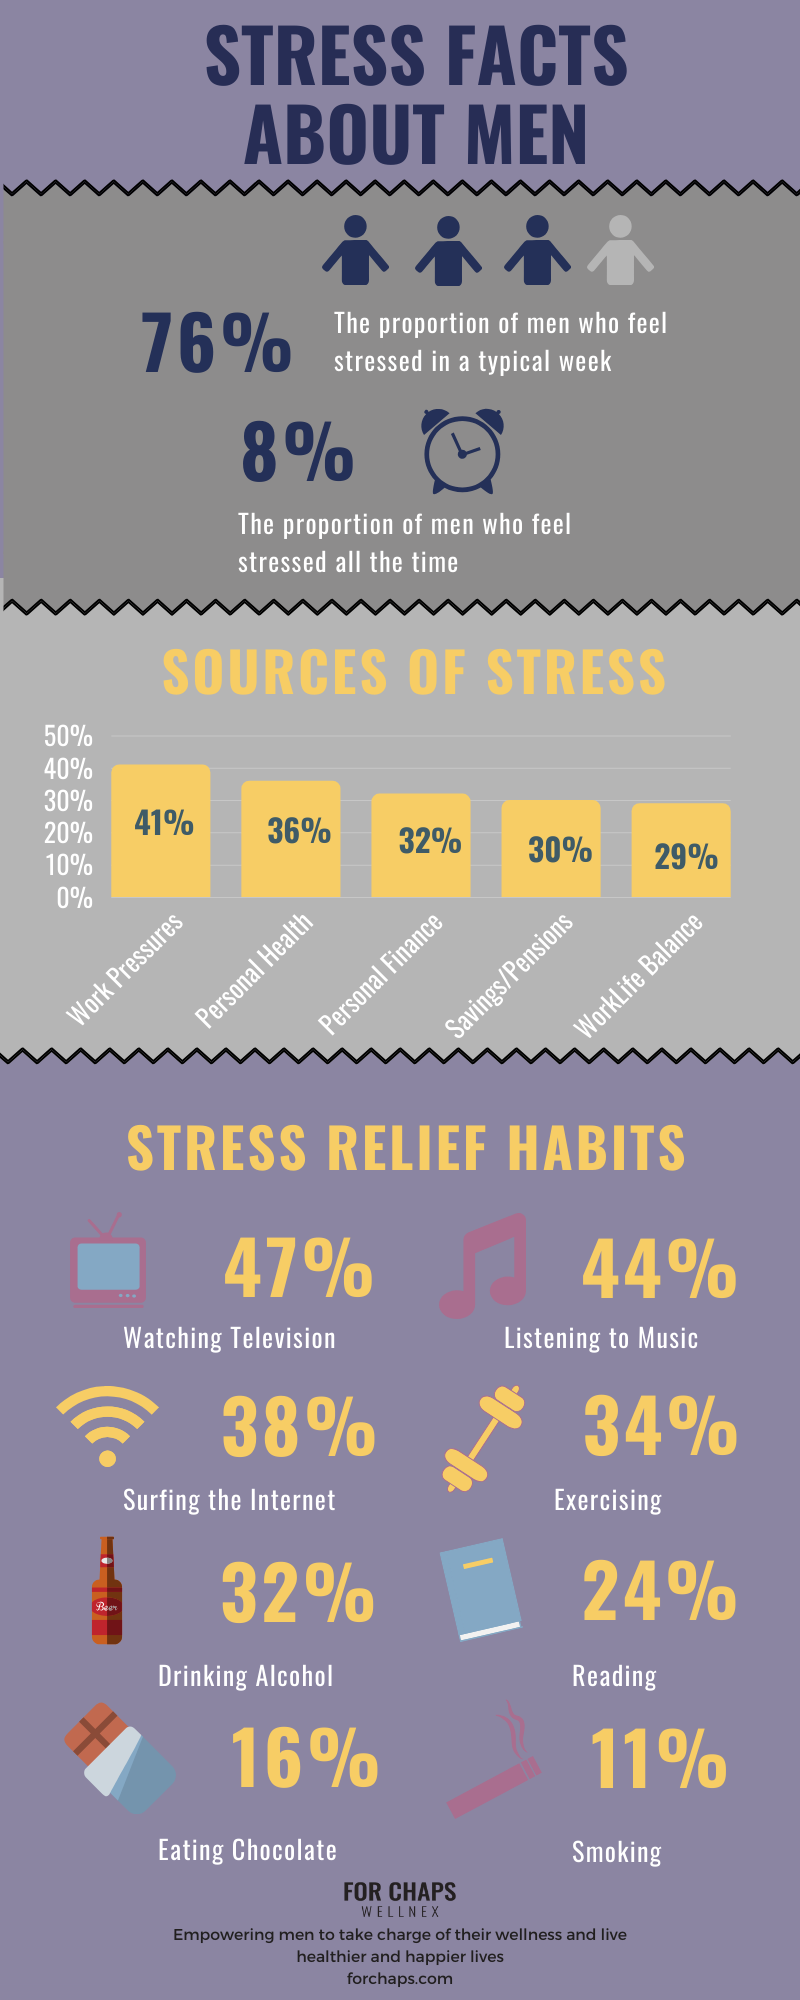 Key Stress Facts for Men